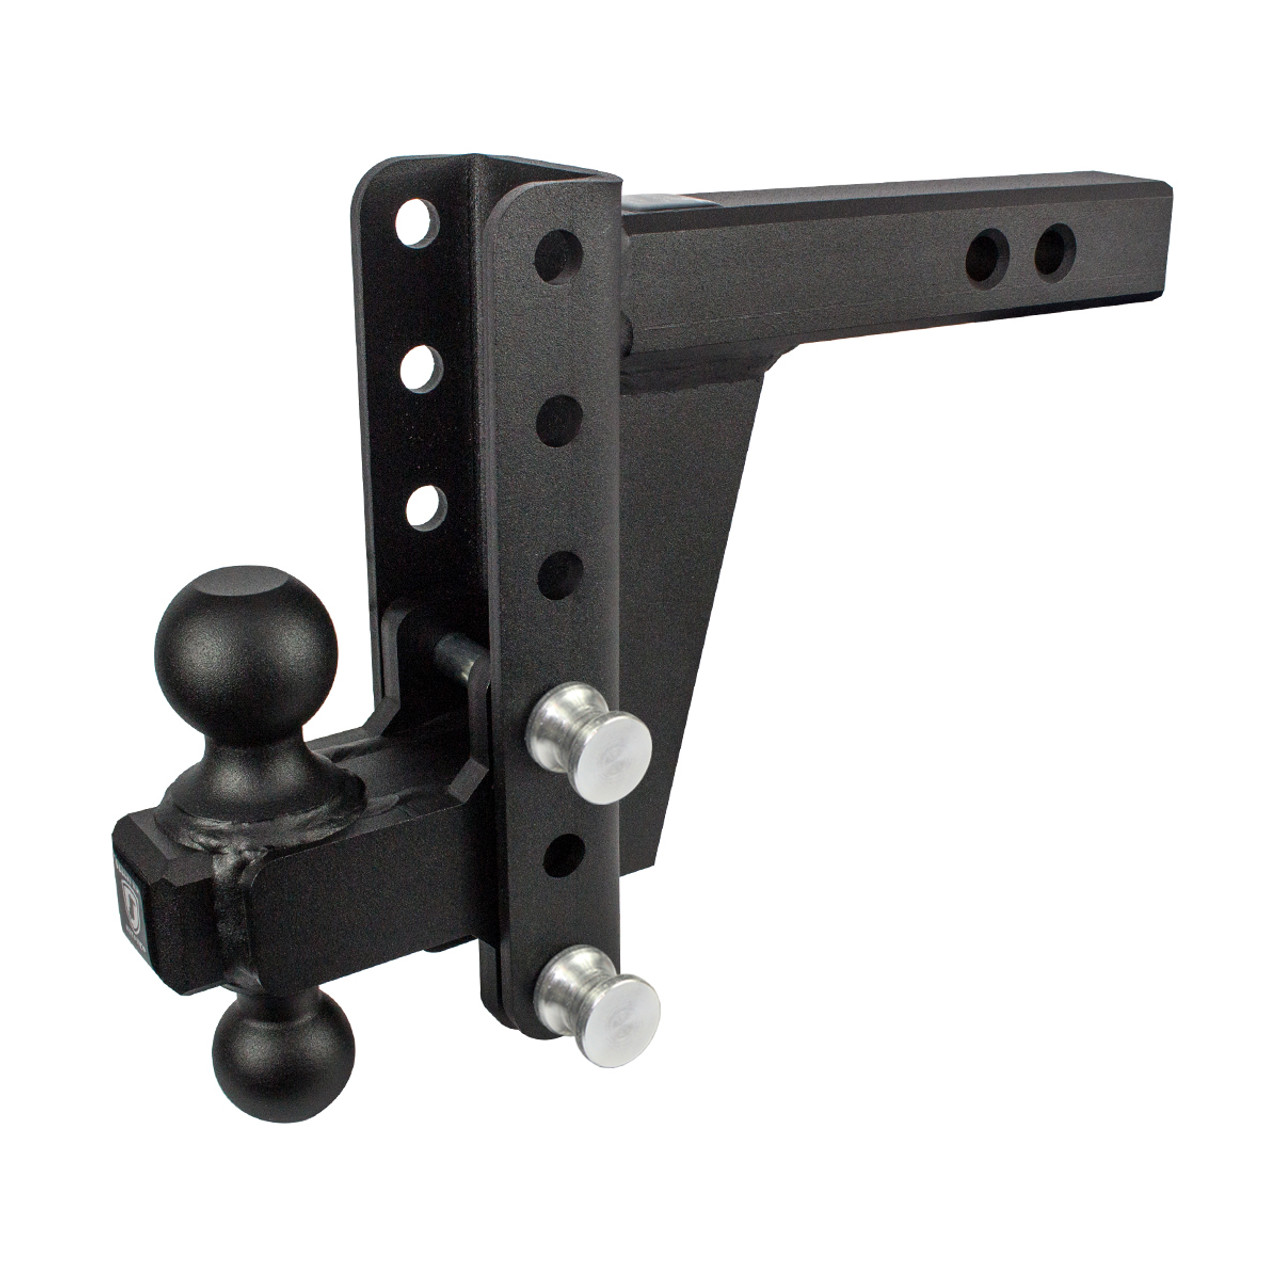 2.0” Extreme Duty 6” Drop/Rise Trailer Hitch